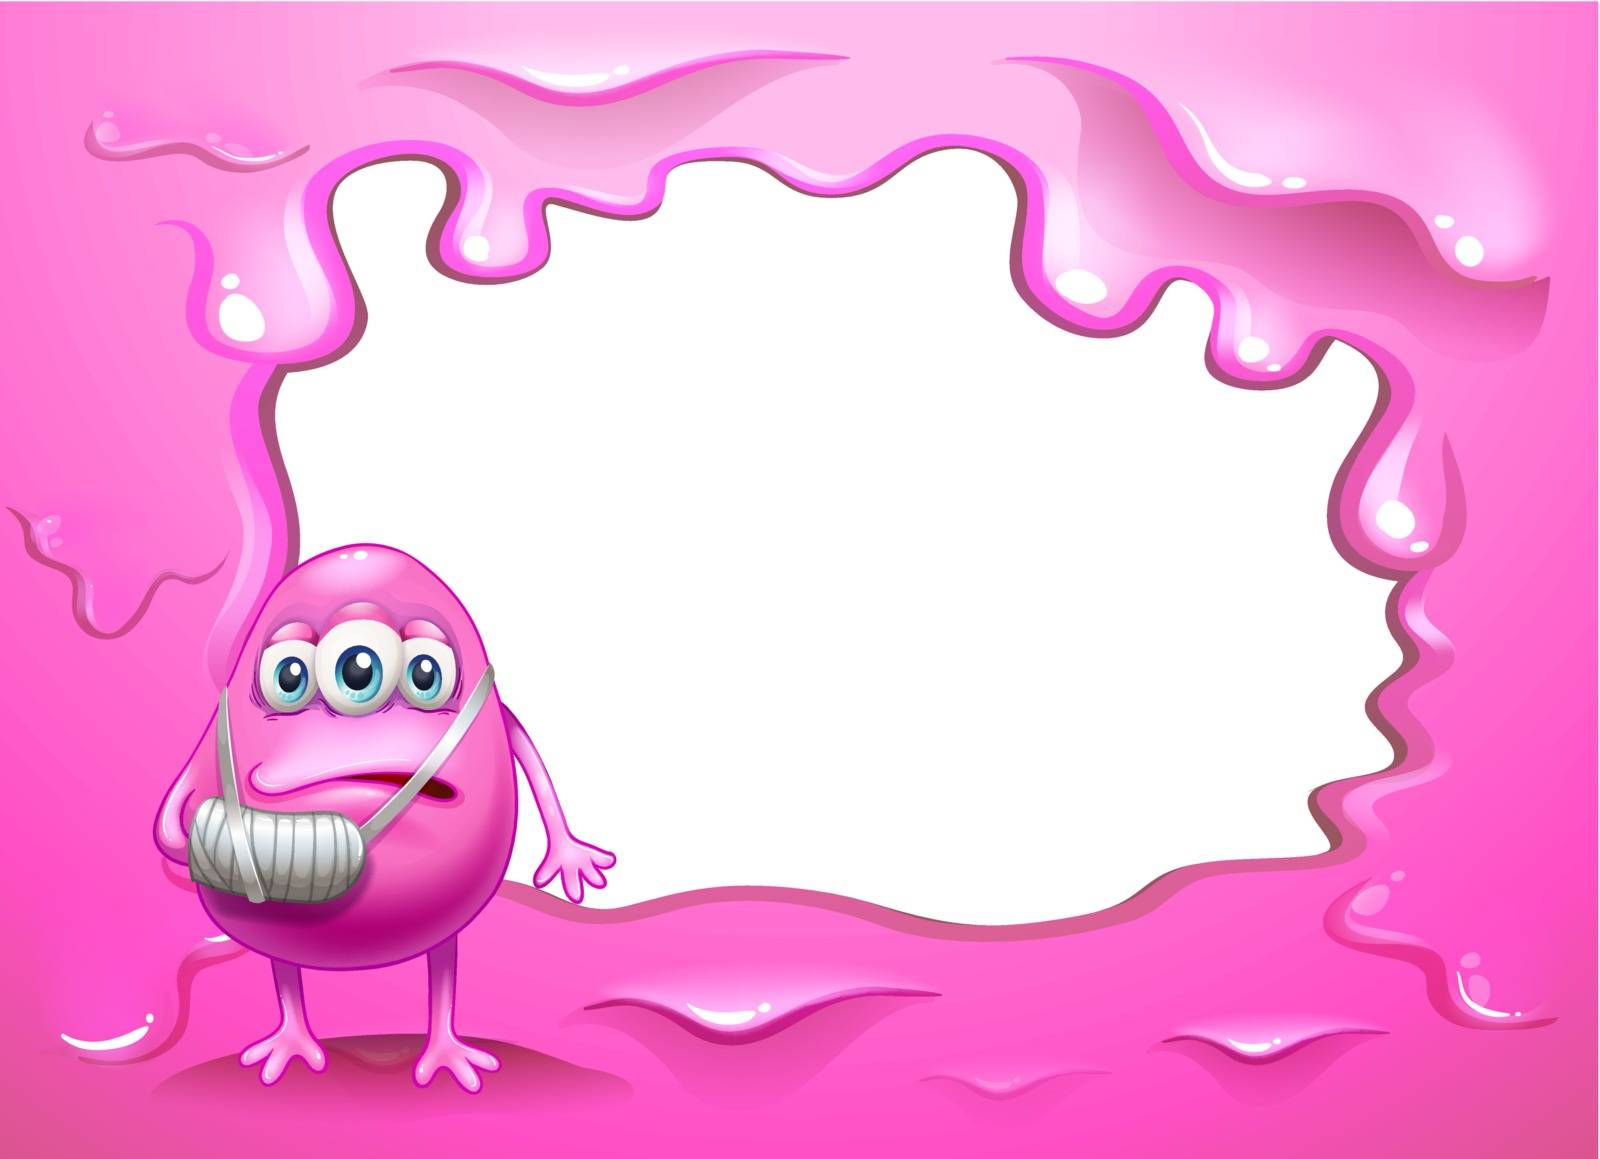 A pink border design with an injured pink monster by iimages